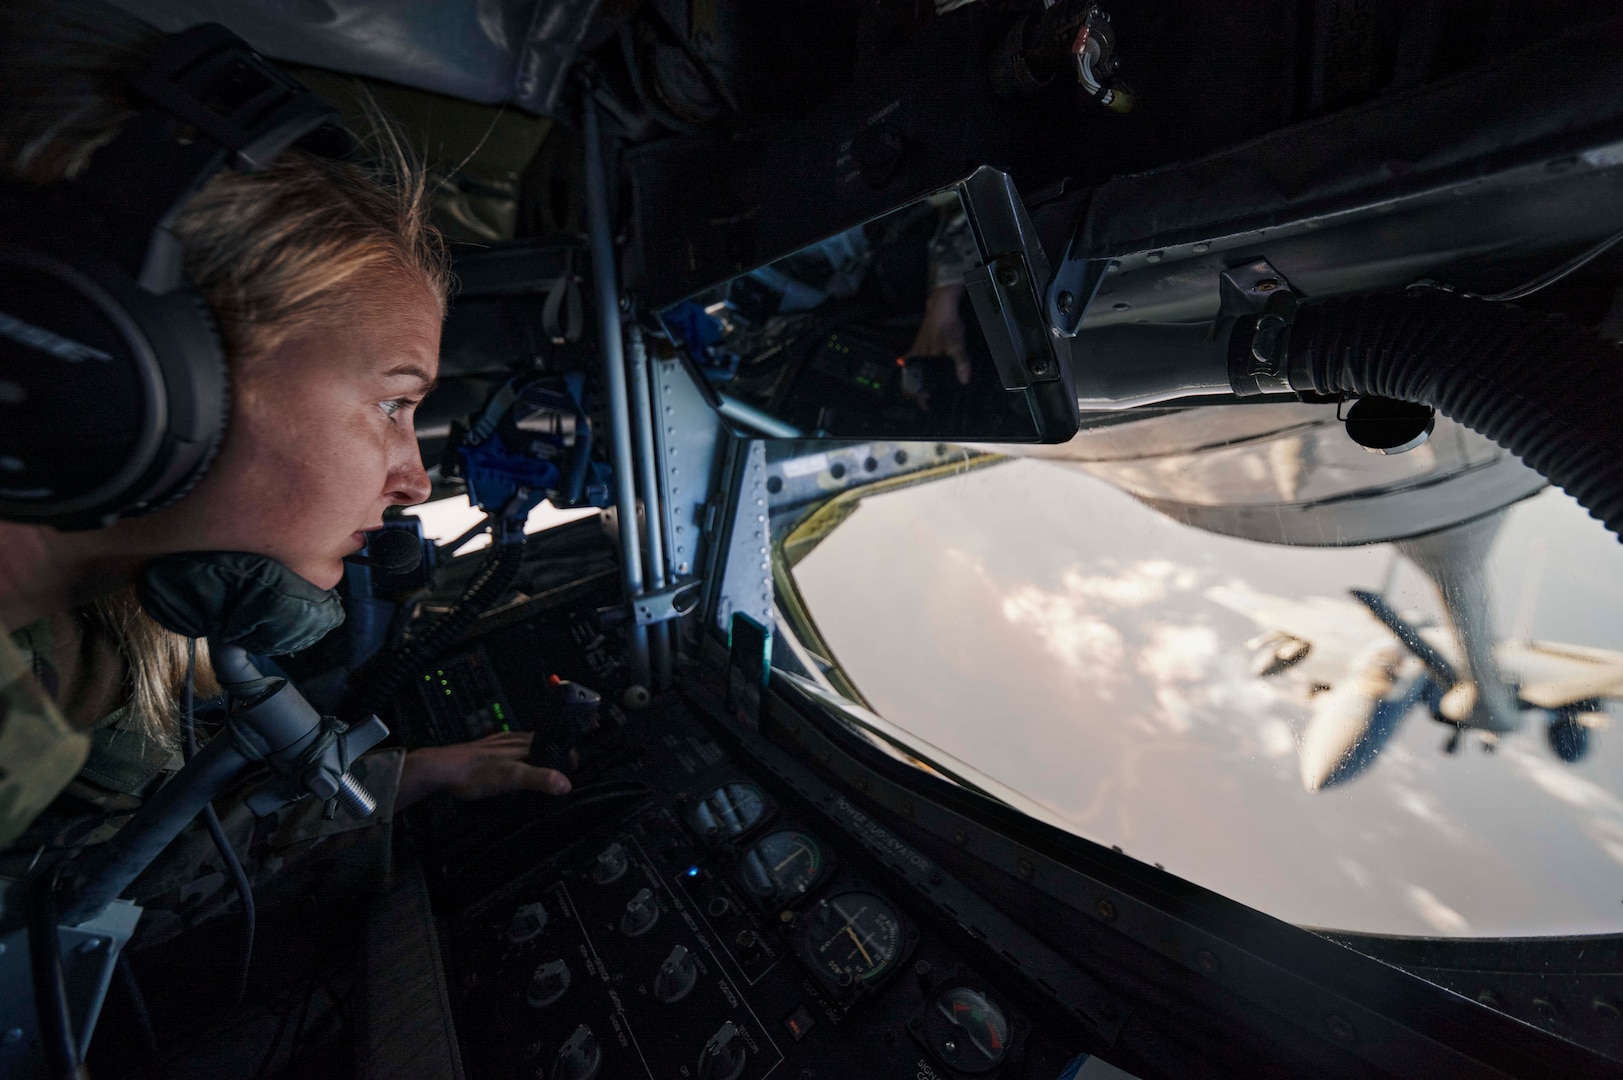 U.S. Air Force Airman 1st Class Natalia Berry, a KC-135 Stratotanker in-flight refueling specialist assigned to the 349th Expeditionary Air Refueling Squadron, prepares to refuel a U.S. Air Force F-15E Strike Eagle aircraft during a refueling mission over the U.S. Central Command area of responsibility Oct. 22, 2021.